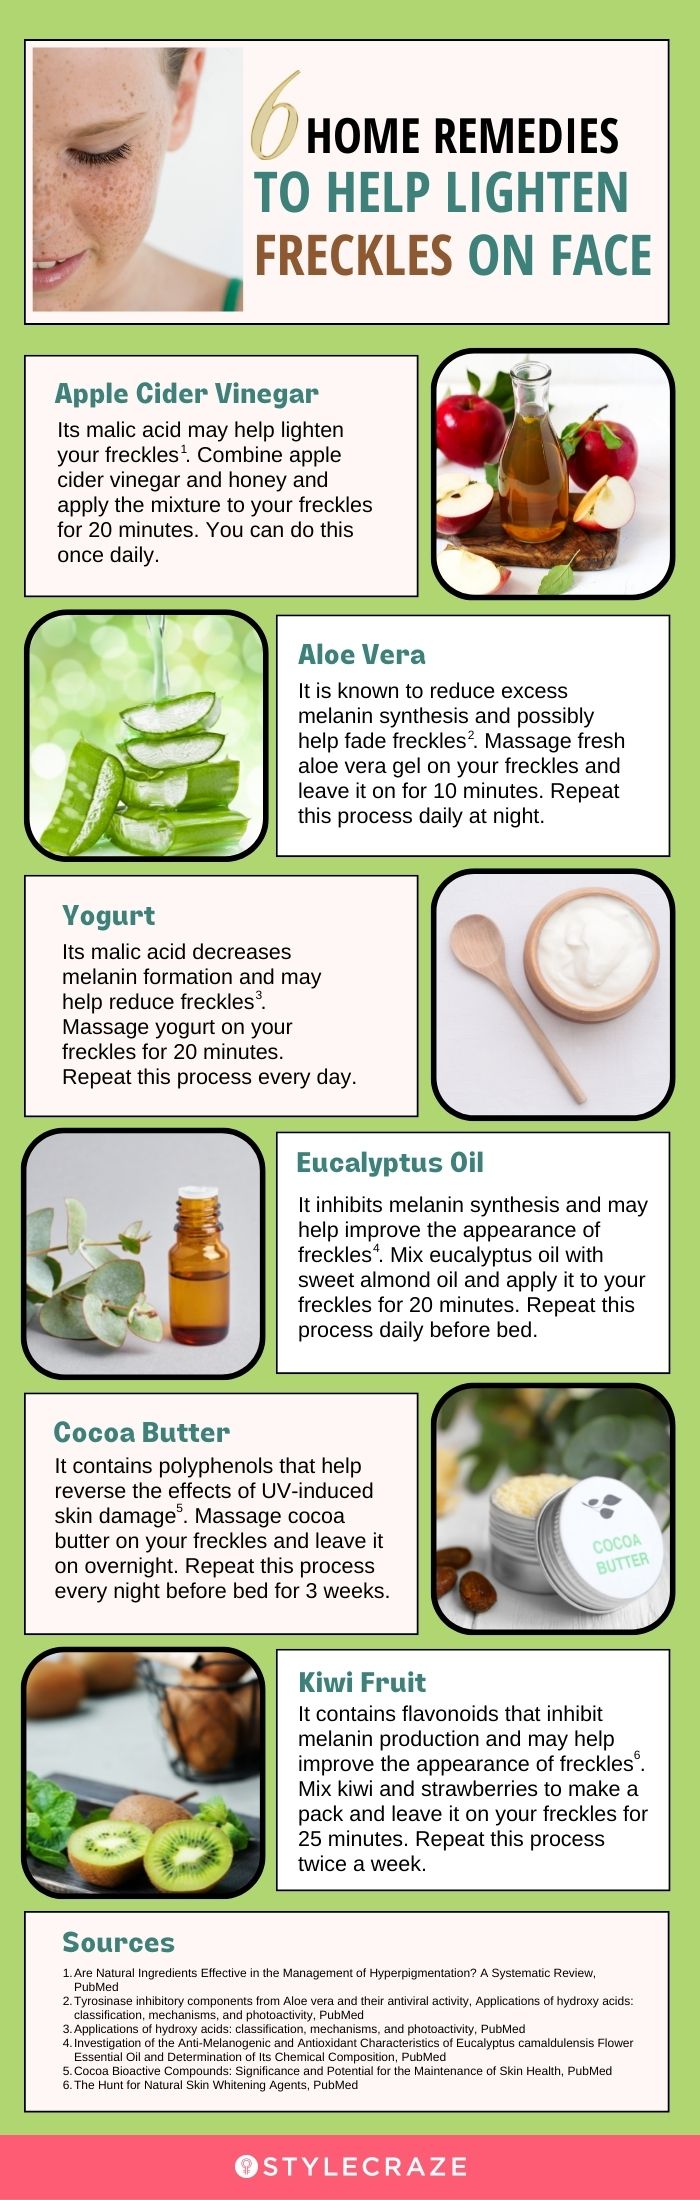 6 home remedies to help lighten freckles on face (infographic)